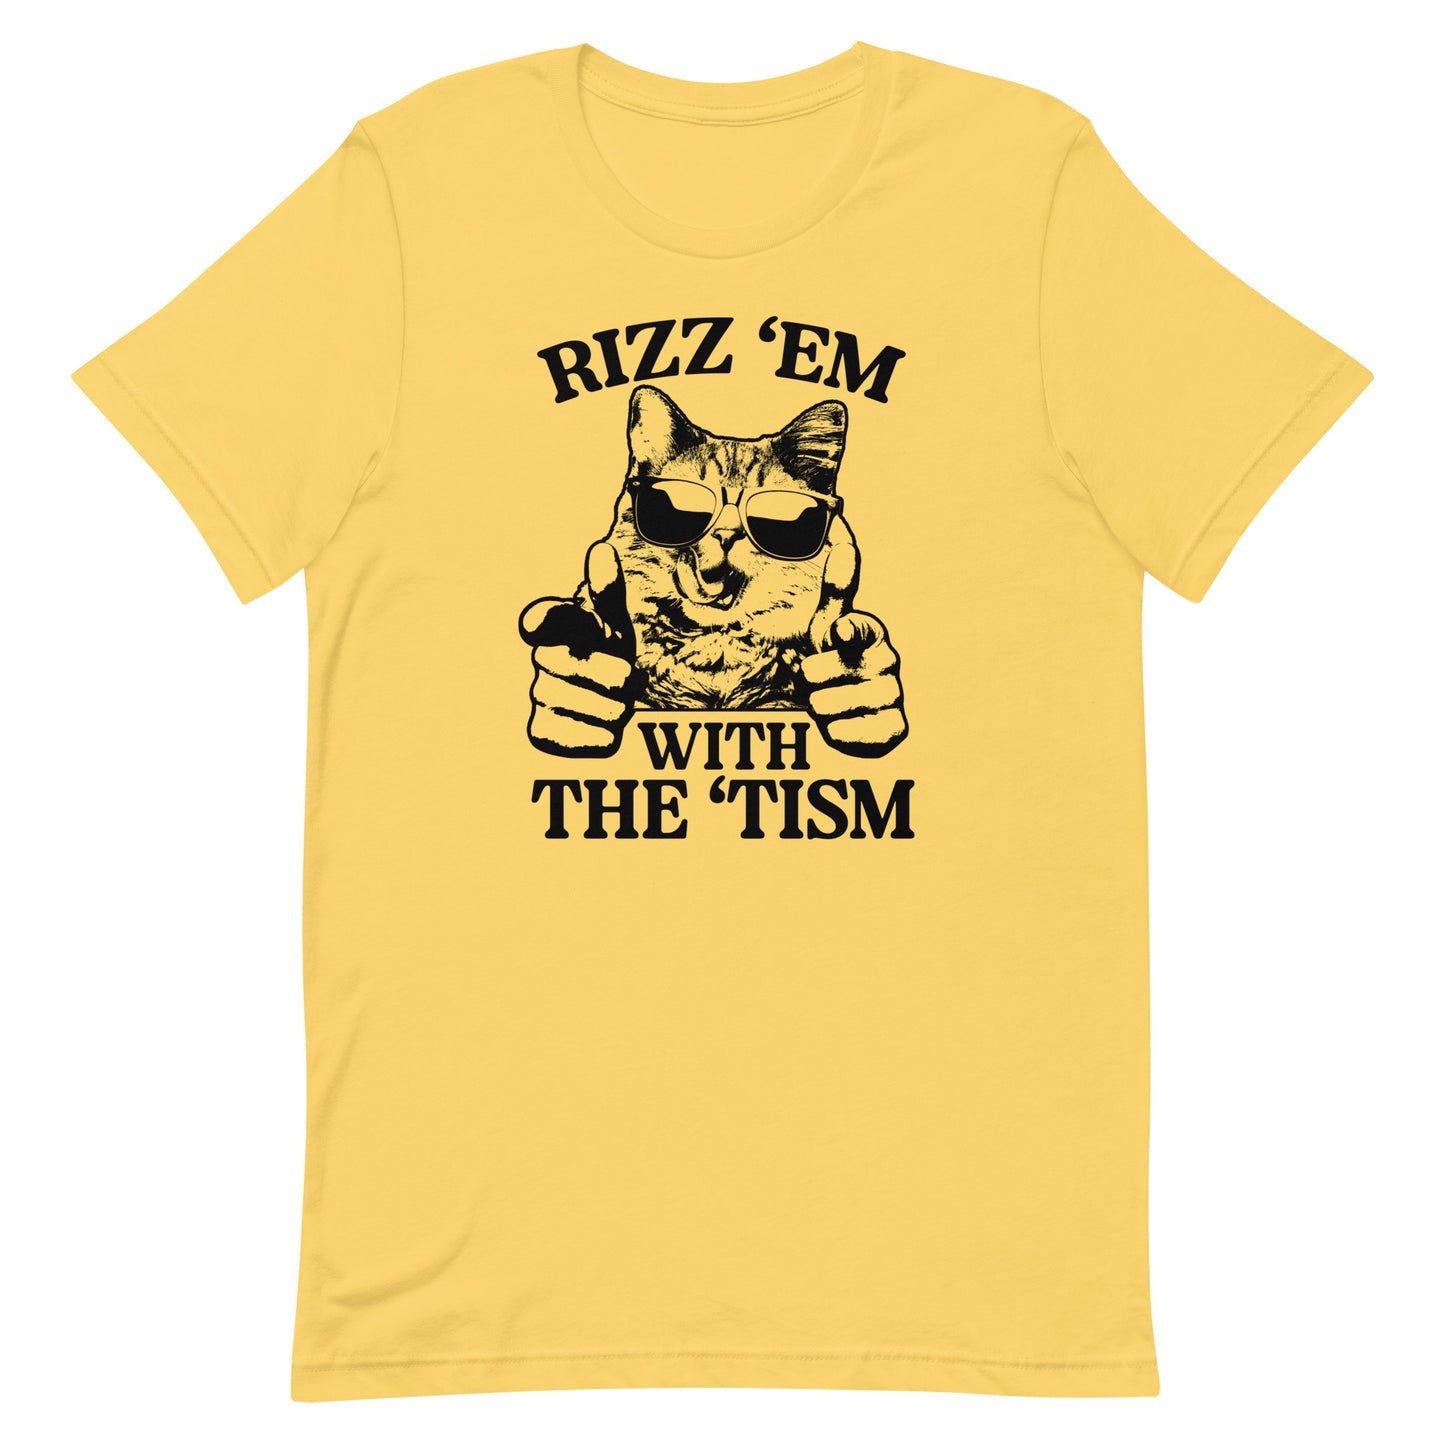 Rizz 'Em With the 'Tism (Cat) Unisex t-shirt